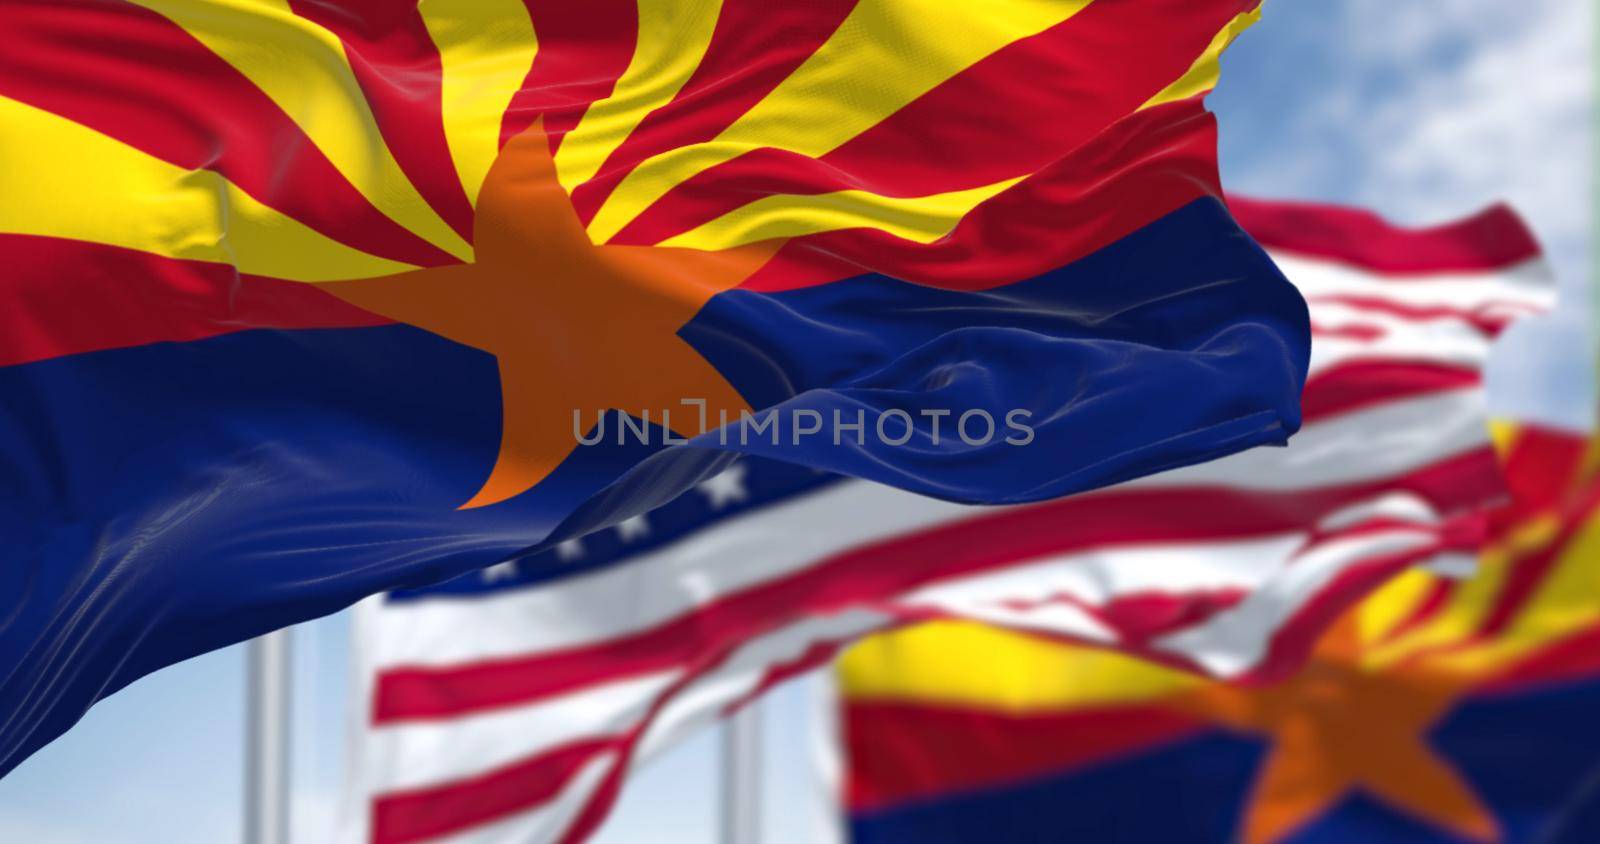 The flags of the Arizona state and United States waving in the wind by rarrarorro